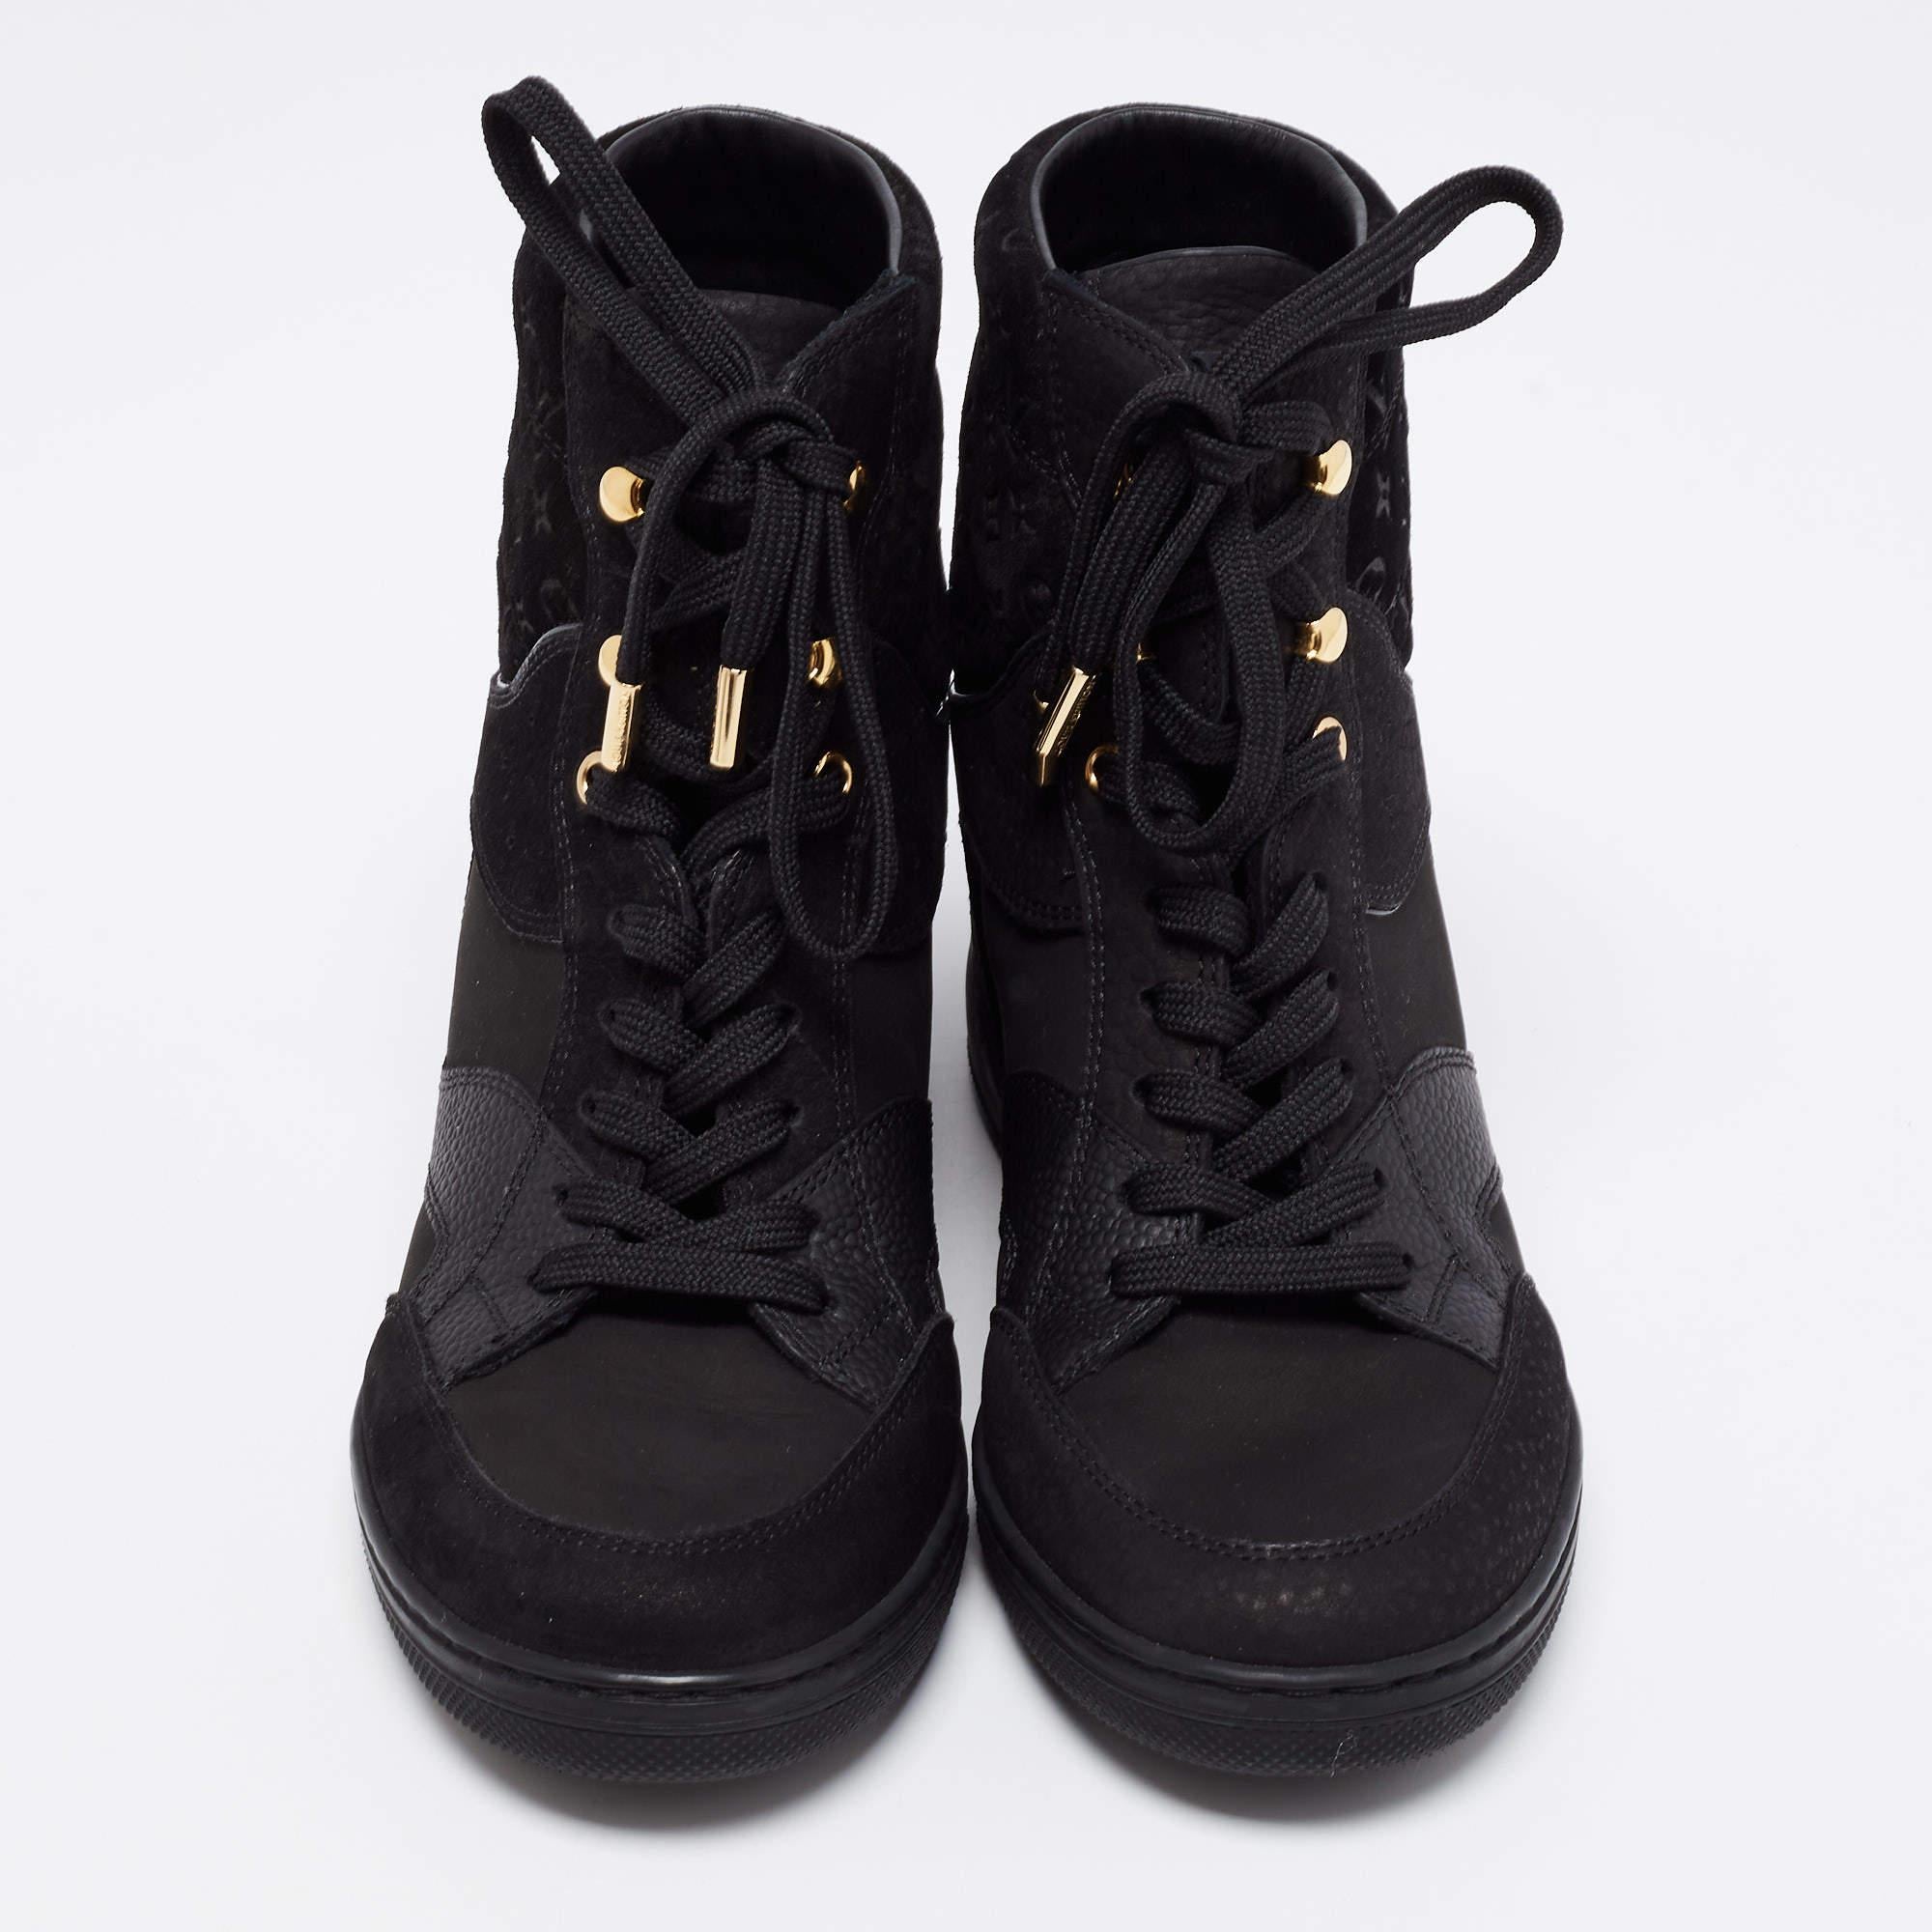 Sneakers are the best way to experience total comfort and luxury. These sneakers from Louis Vuitton are super sturdy and stylish. They are crafted from black Monogram Empreinte leather and suede into a high-top profile. They have gold-tone hardware.